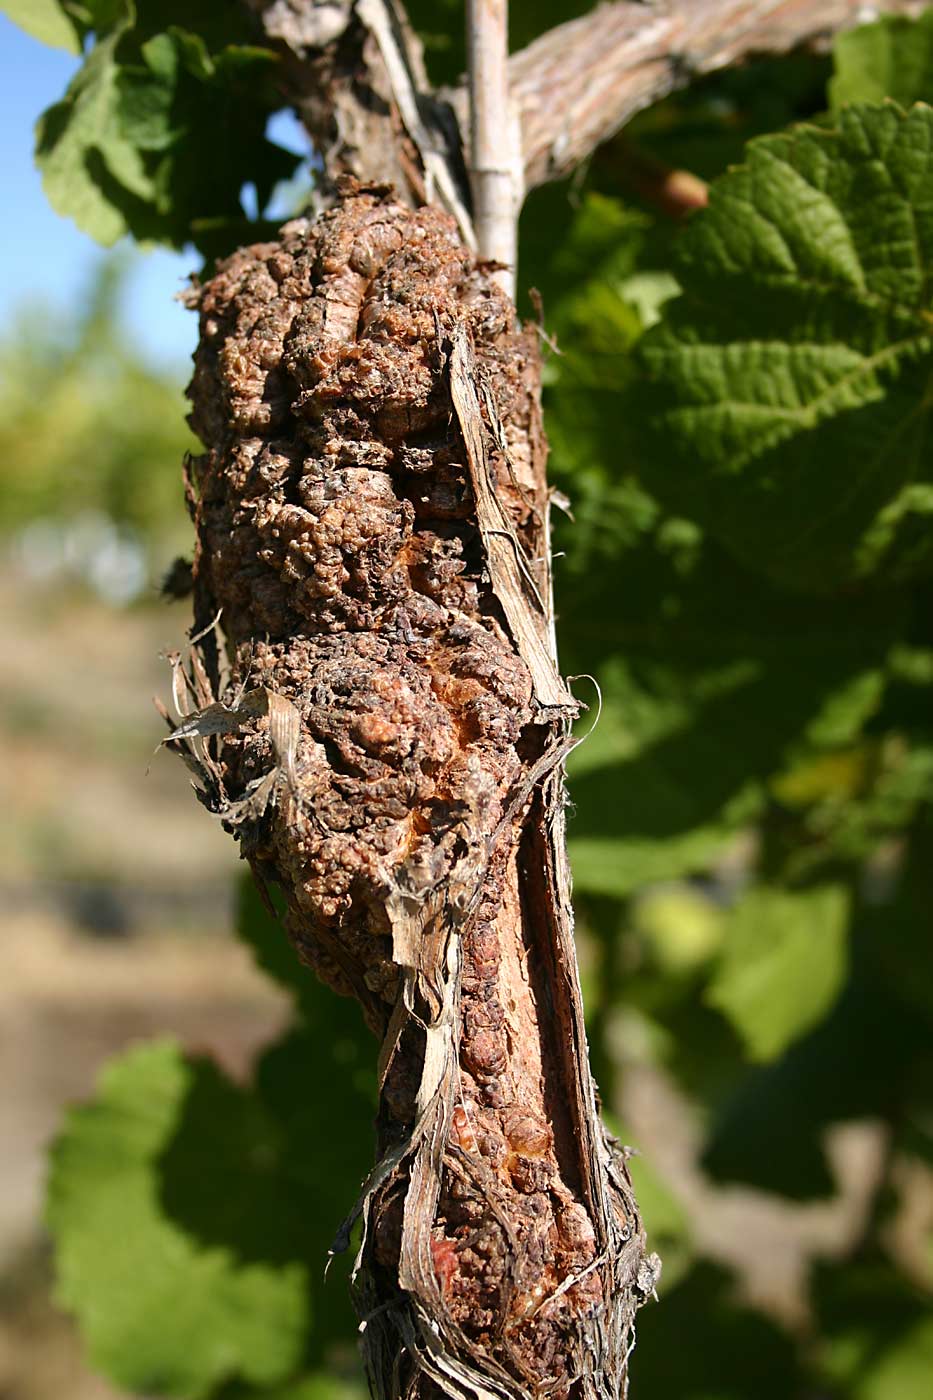 Risk of crown gall disease, caused by a bacterium that hijacks the healing process after cold damage, appears to be reduced but not eliminated by planting certified vines. (Courtesy Michelle Moyer, Washington State University)